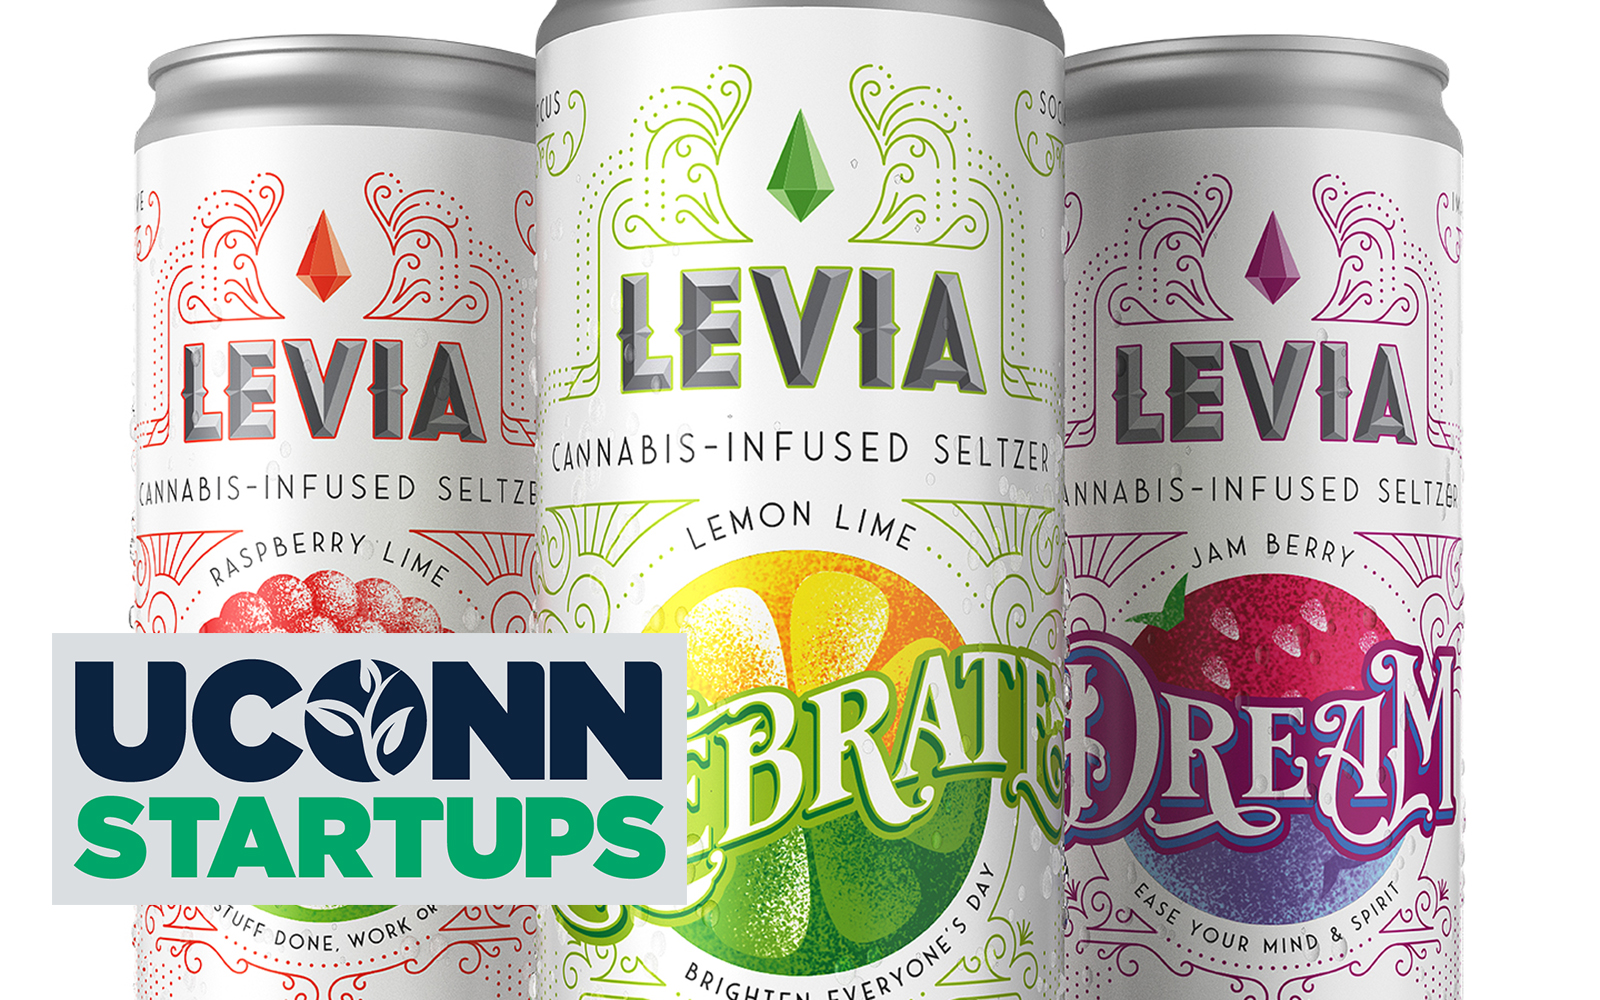 Cans of Levia - Cannabis-infused seltzer